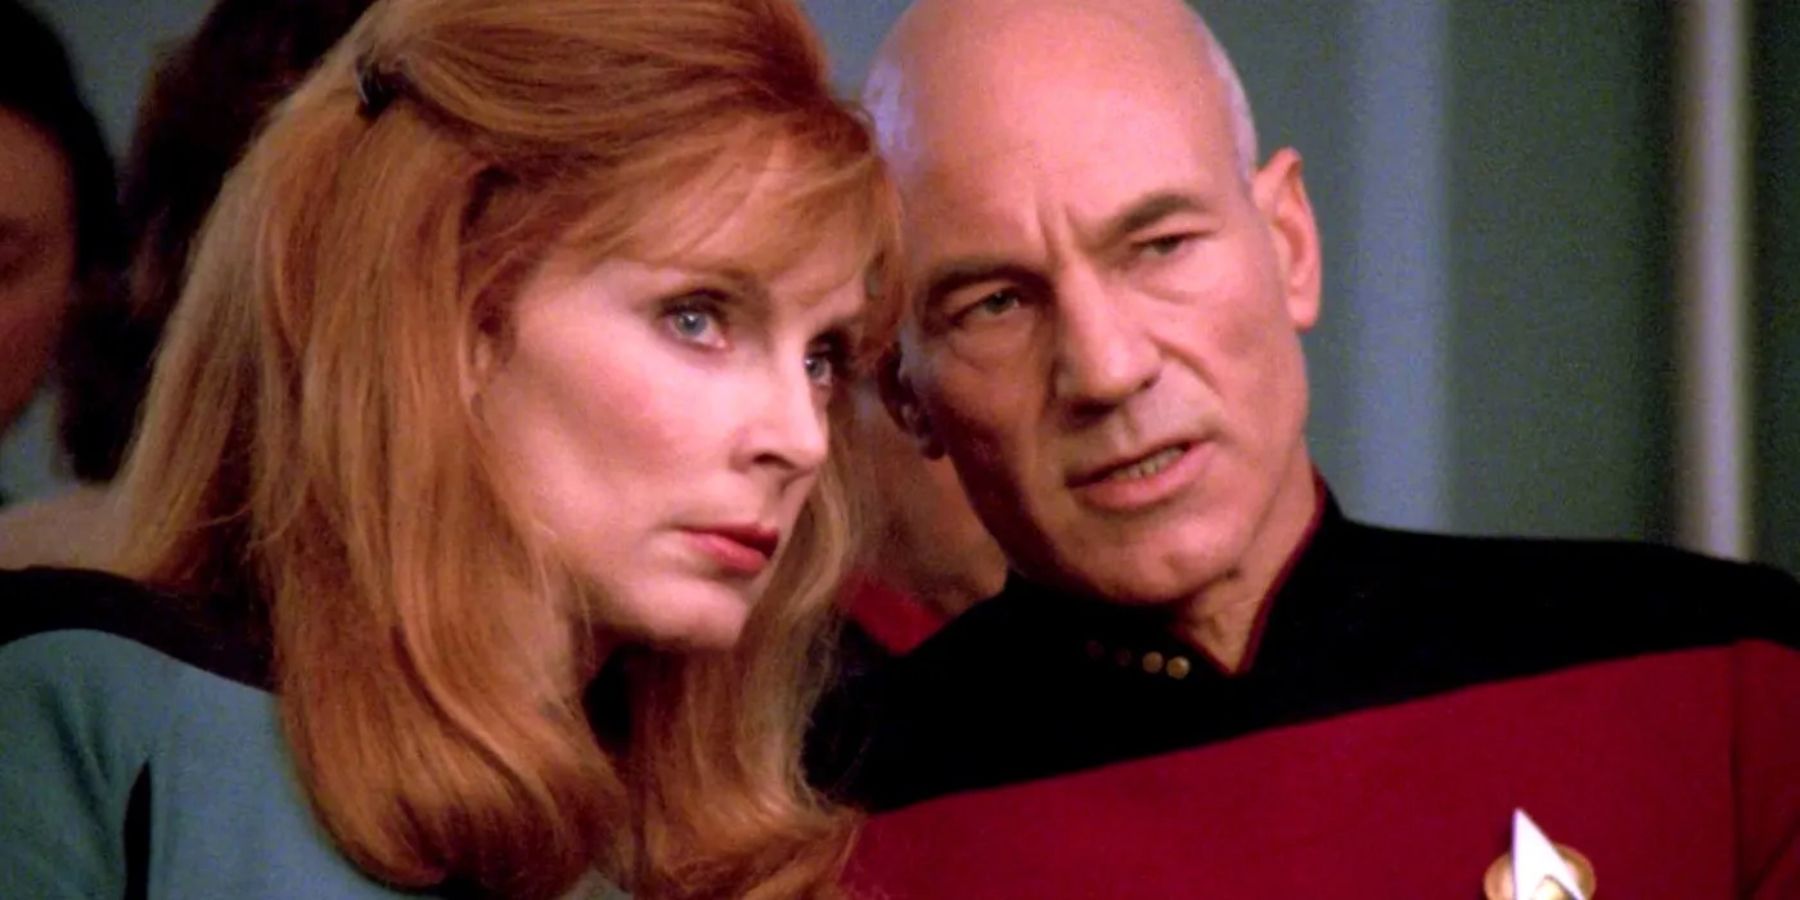 Star Trek: picard and beverly